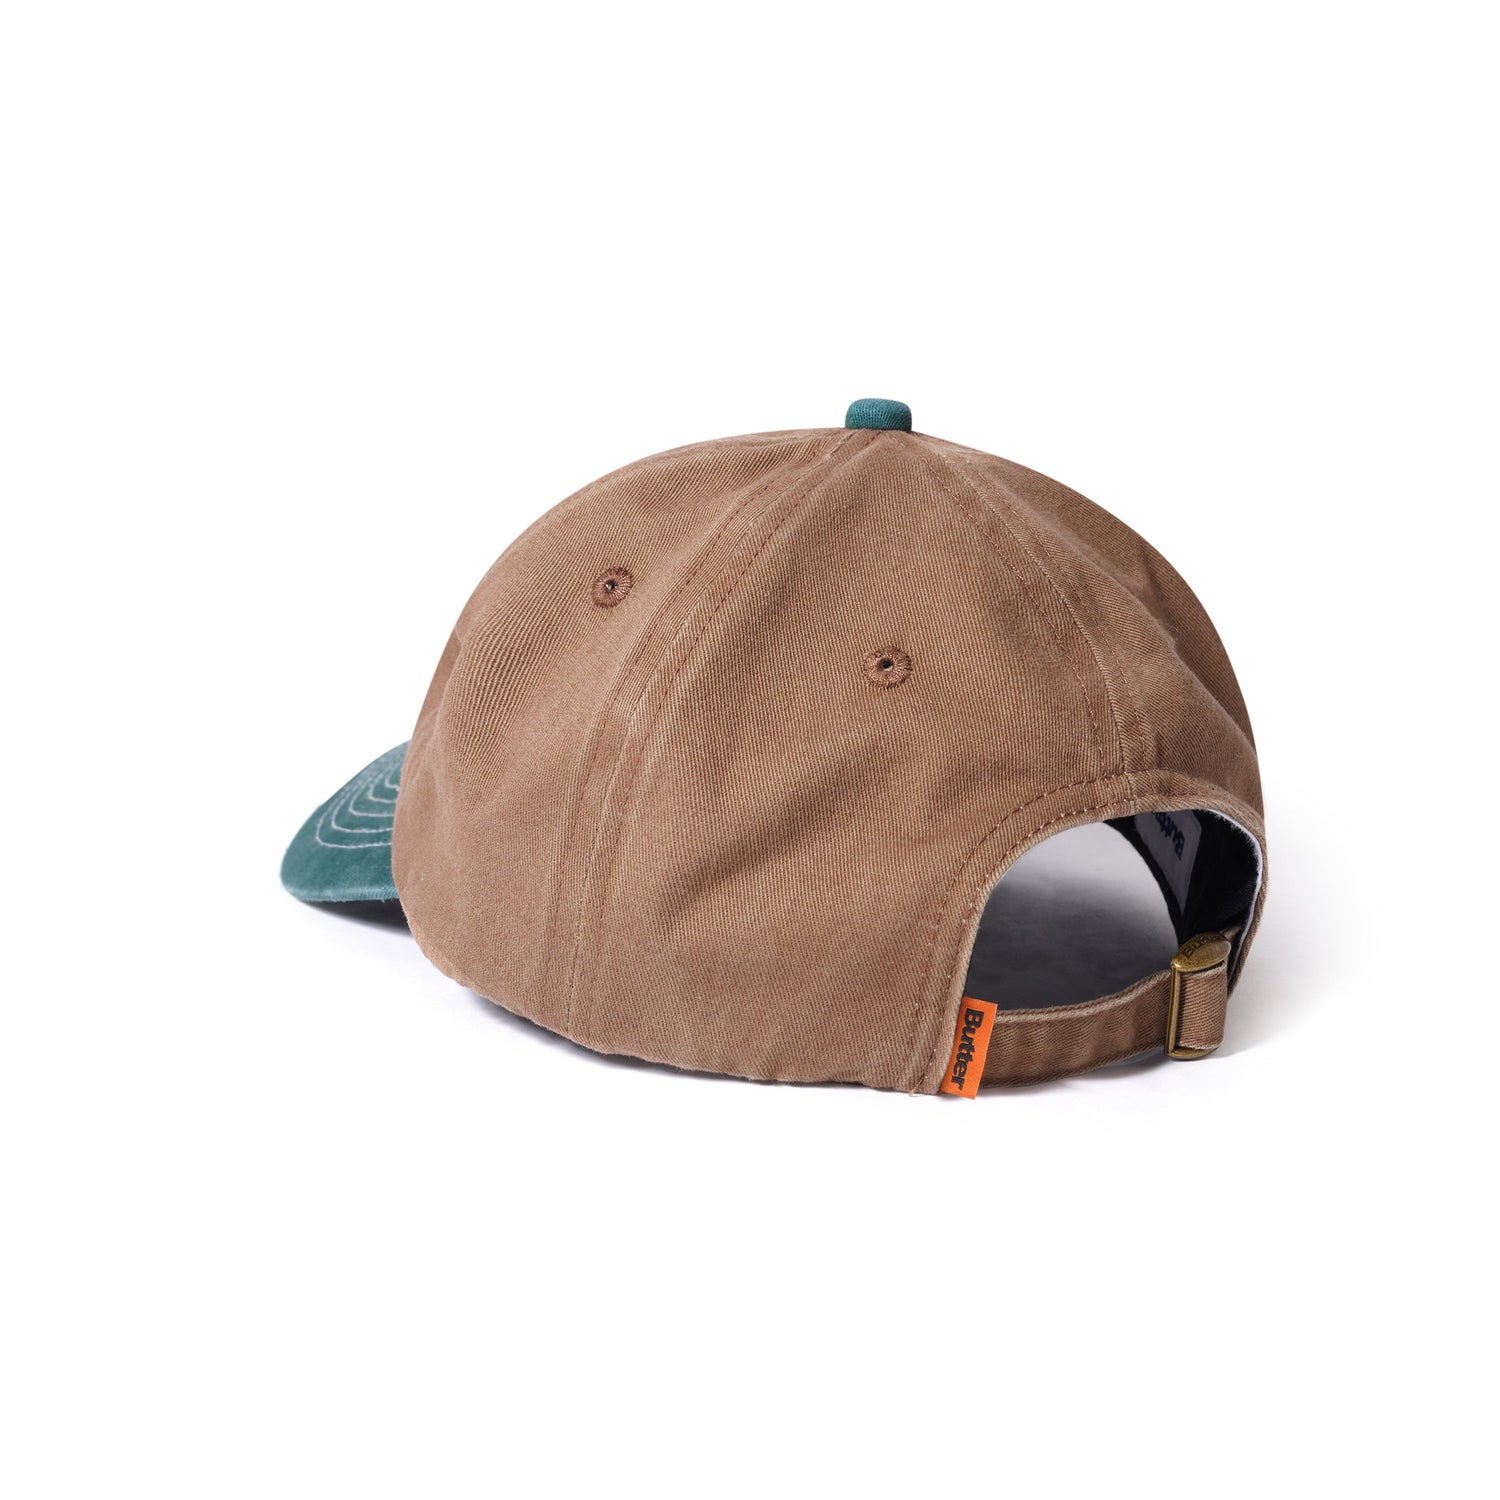 Lonnie 6 Panel Cap, Brown / Forest